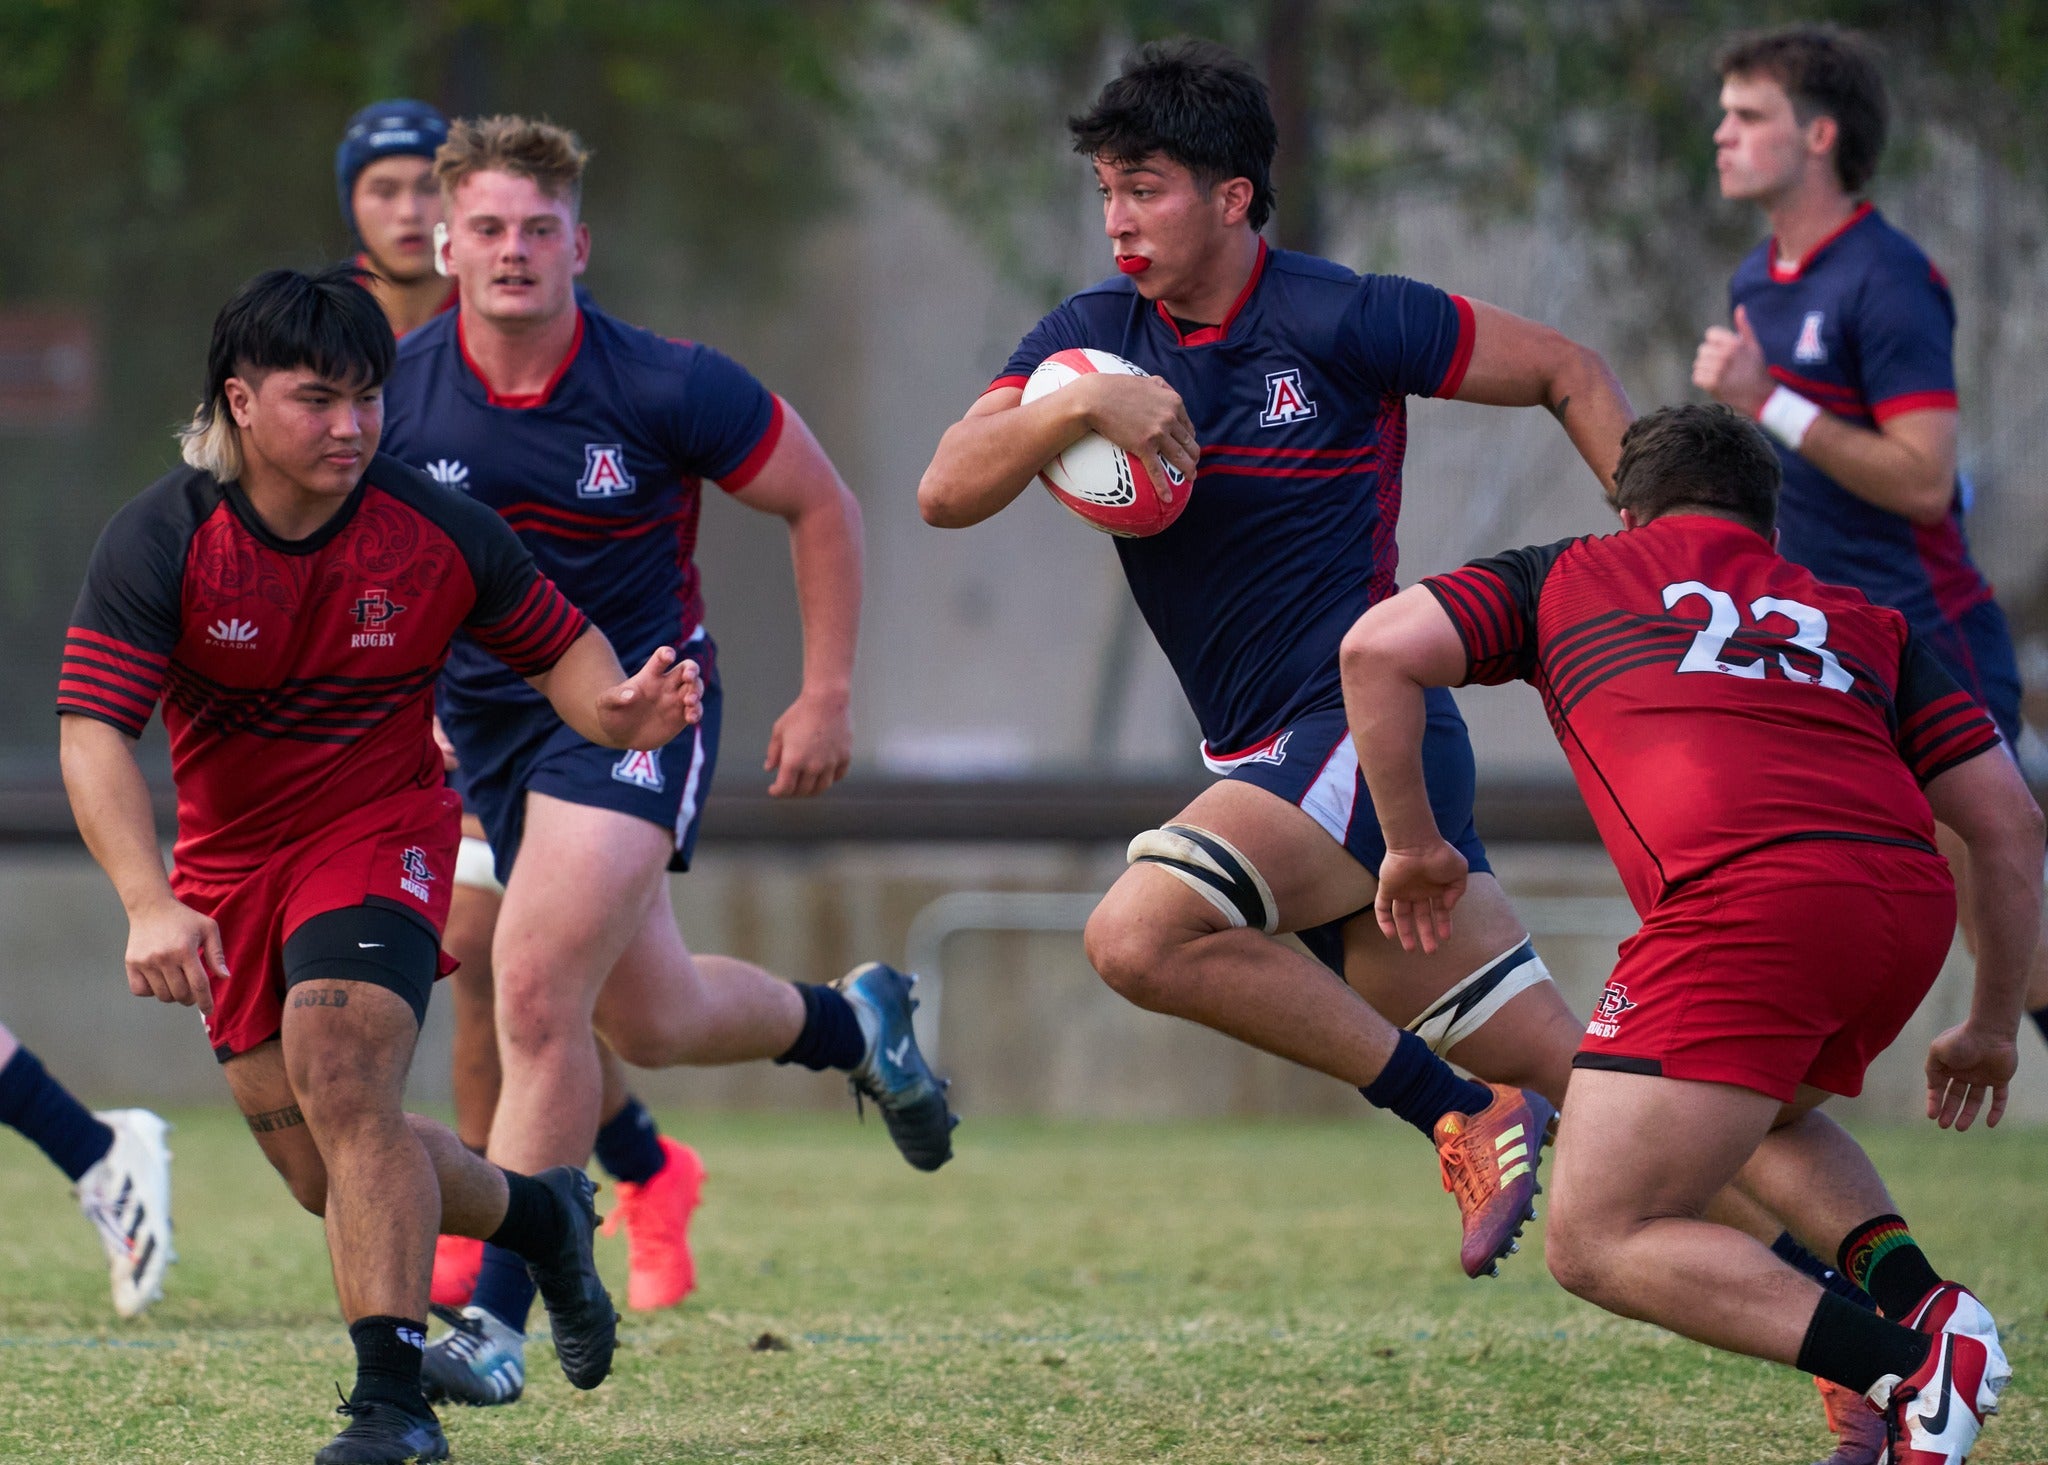 Arizona Rugby "Takes the Next Step" with SPT